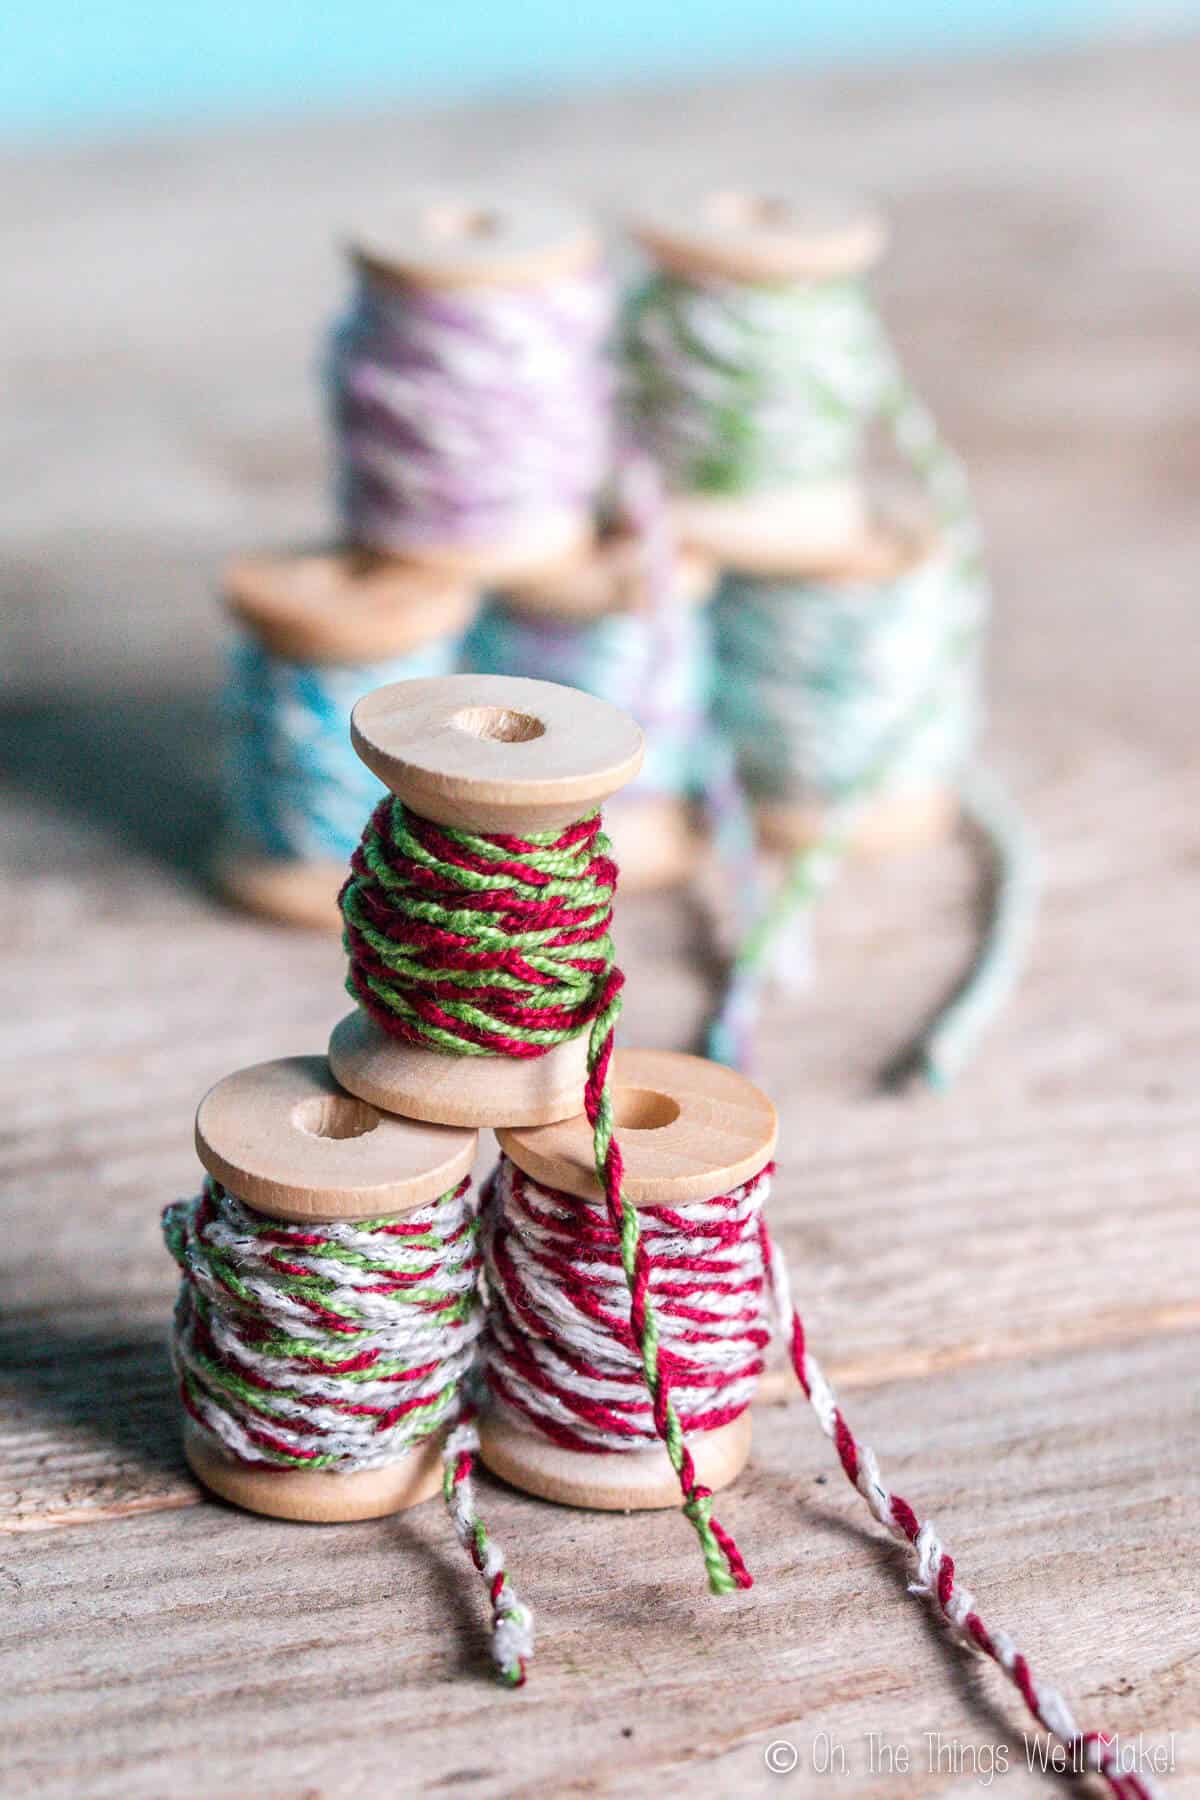 Make your own professional looking DIY bakers twine in custom colors quickly and easily using cotton thread or embroidery floss.